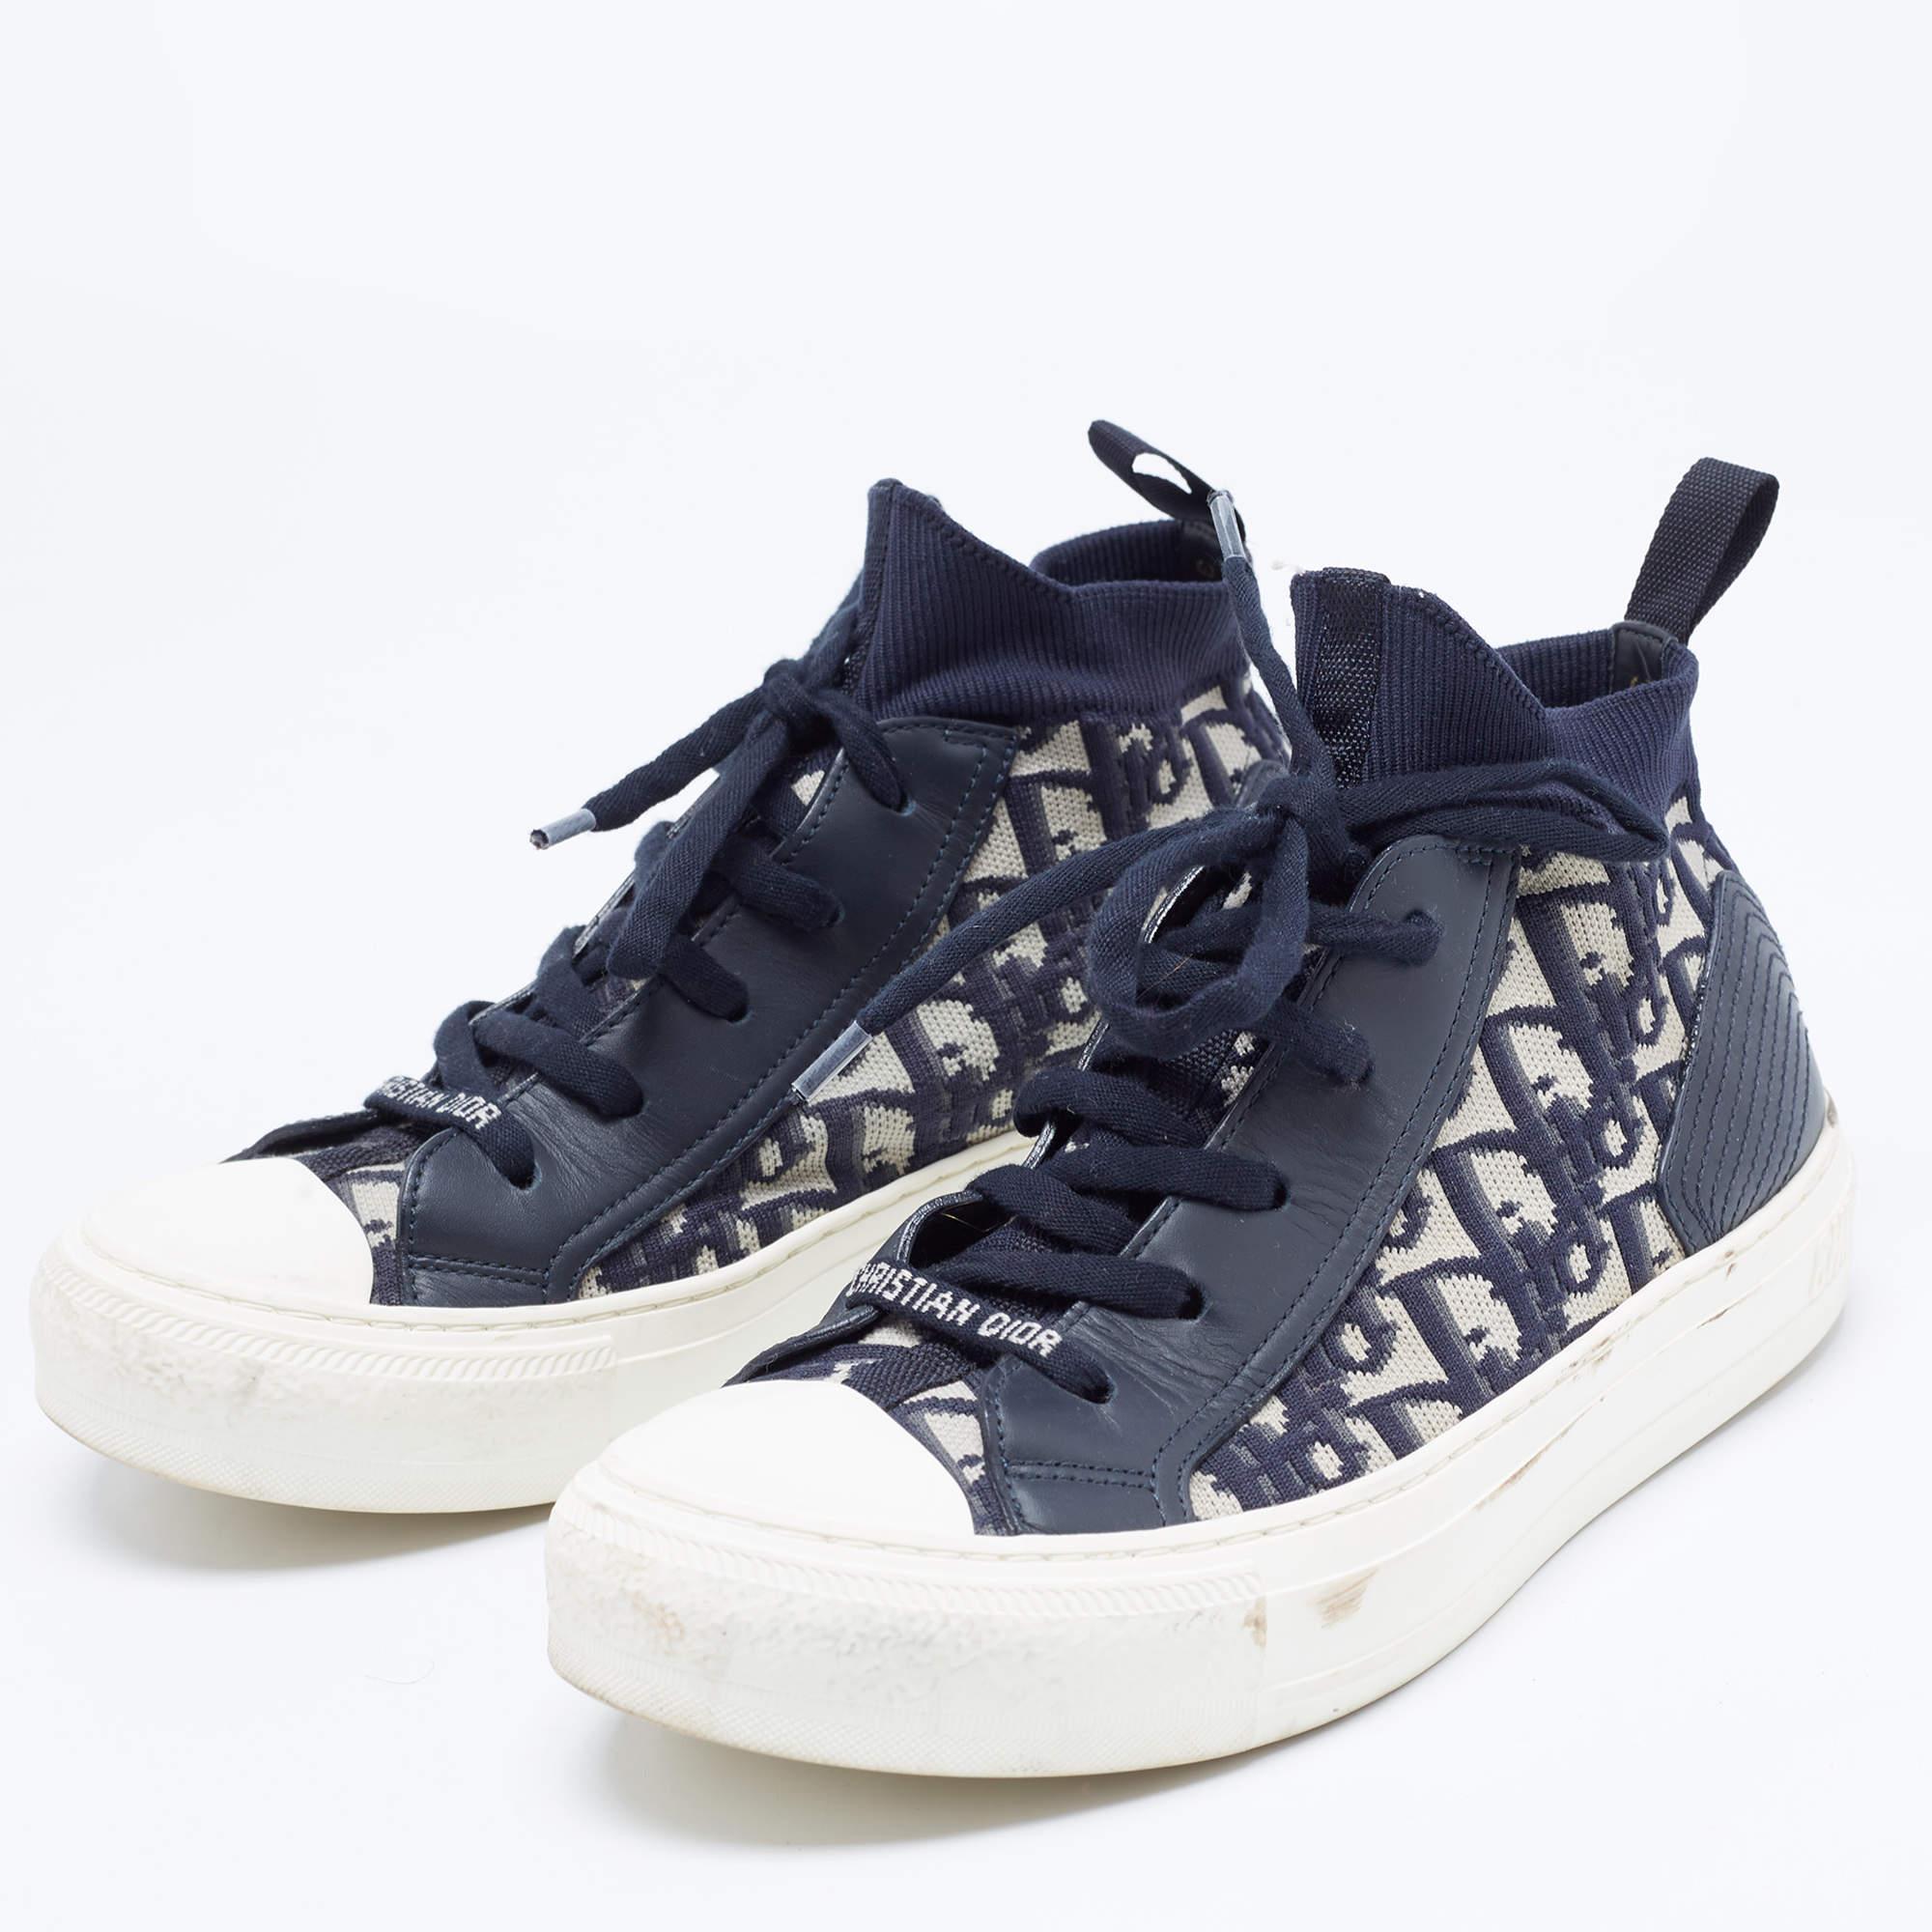 Dior Navy Blue Canvas and Leather Walk'n'Dior Sneakers Size 37 In Good Condition For Sale In Dubai, Al Qouz 2